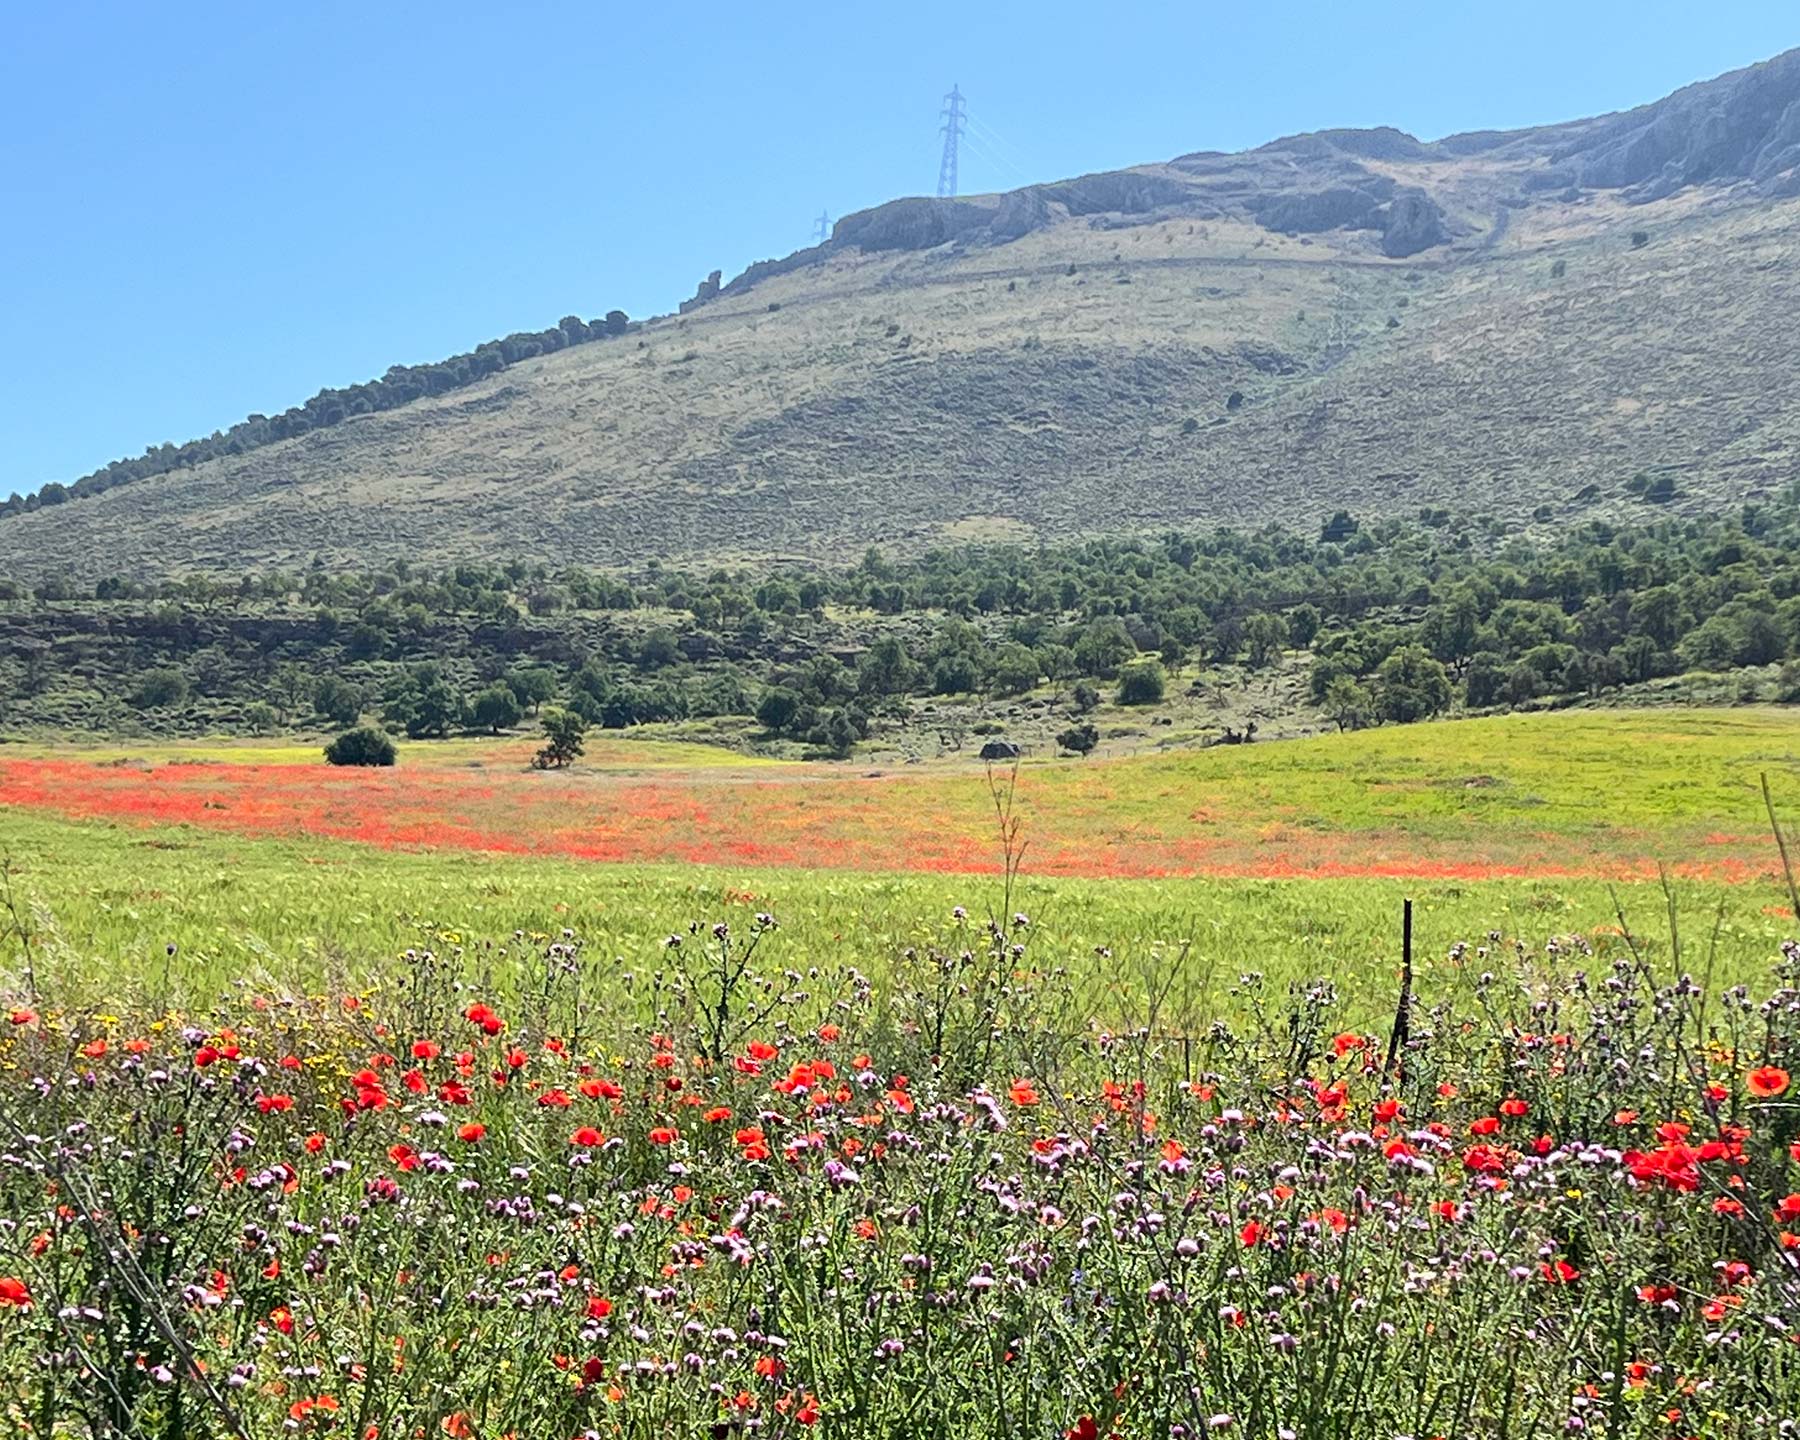 Field of poppies in Southern Spain